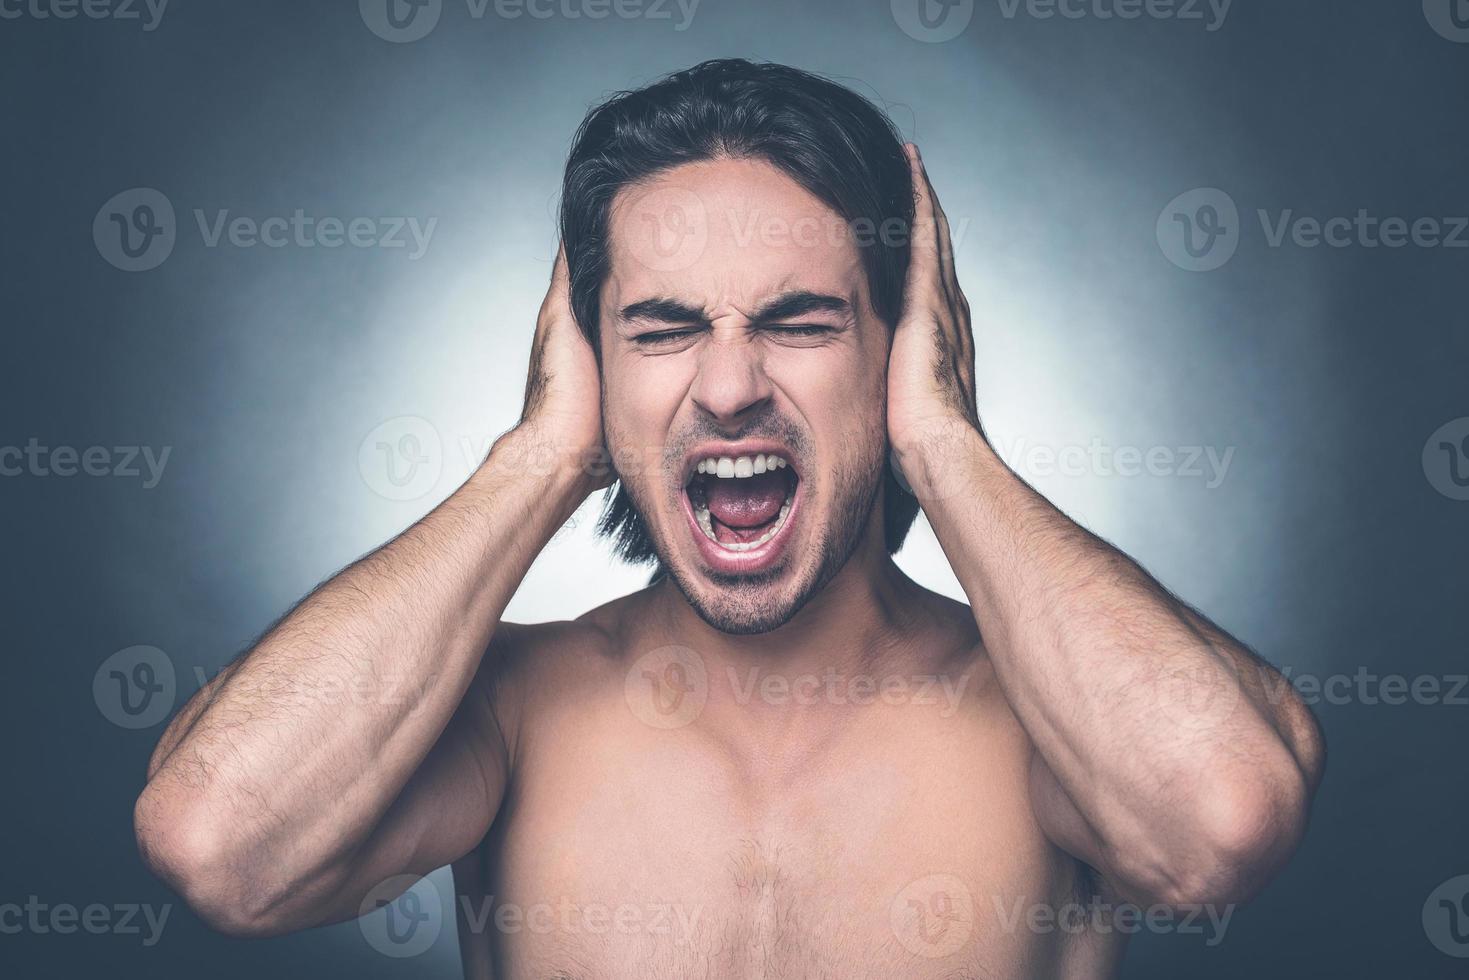 Too loud sound. Portrait of frustrated young shirtless man keeping eyes closed and covering ears with hands while standing against grey background photo